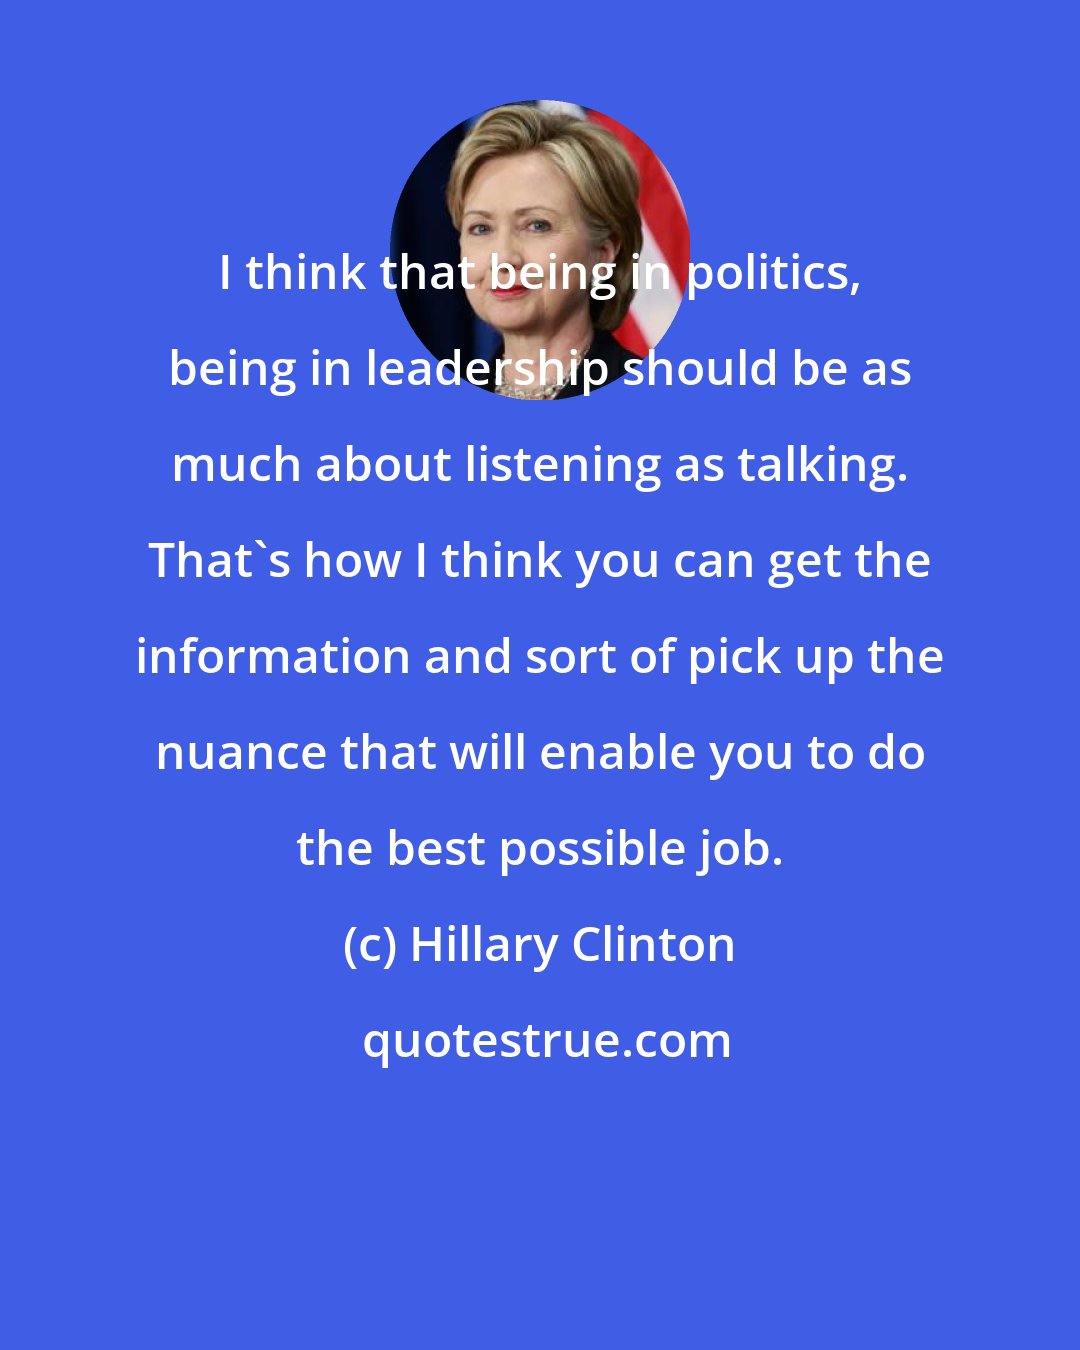 Hillary Clinton: I think that being in politics, being in leadership should be as much about listening as talking. That's how I think you can get the information and sort of pick up the nuance that will enable you to do the best possible job.